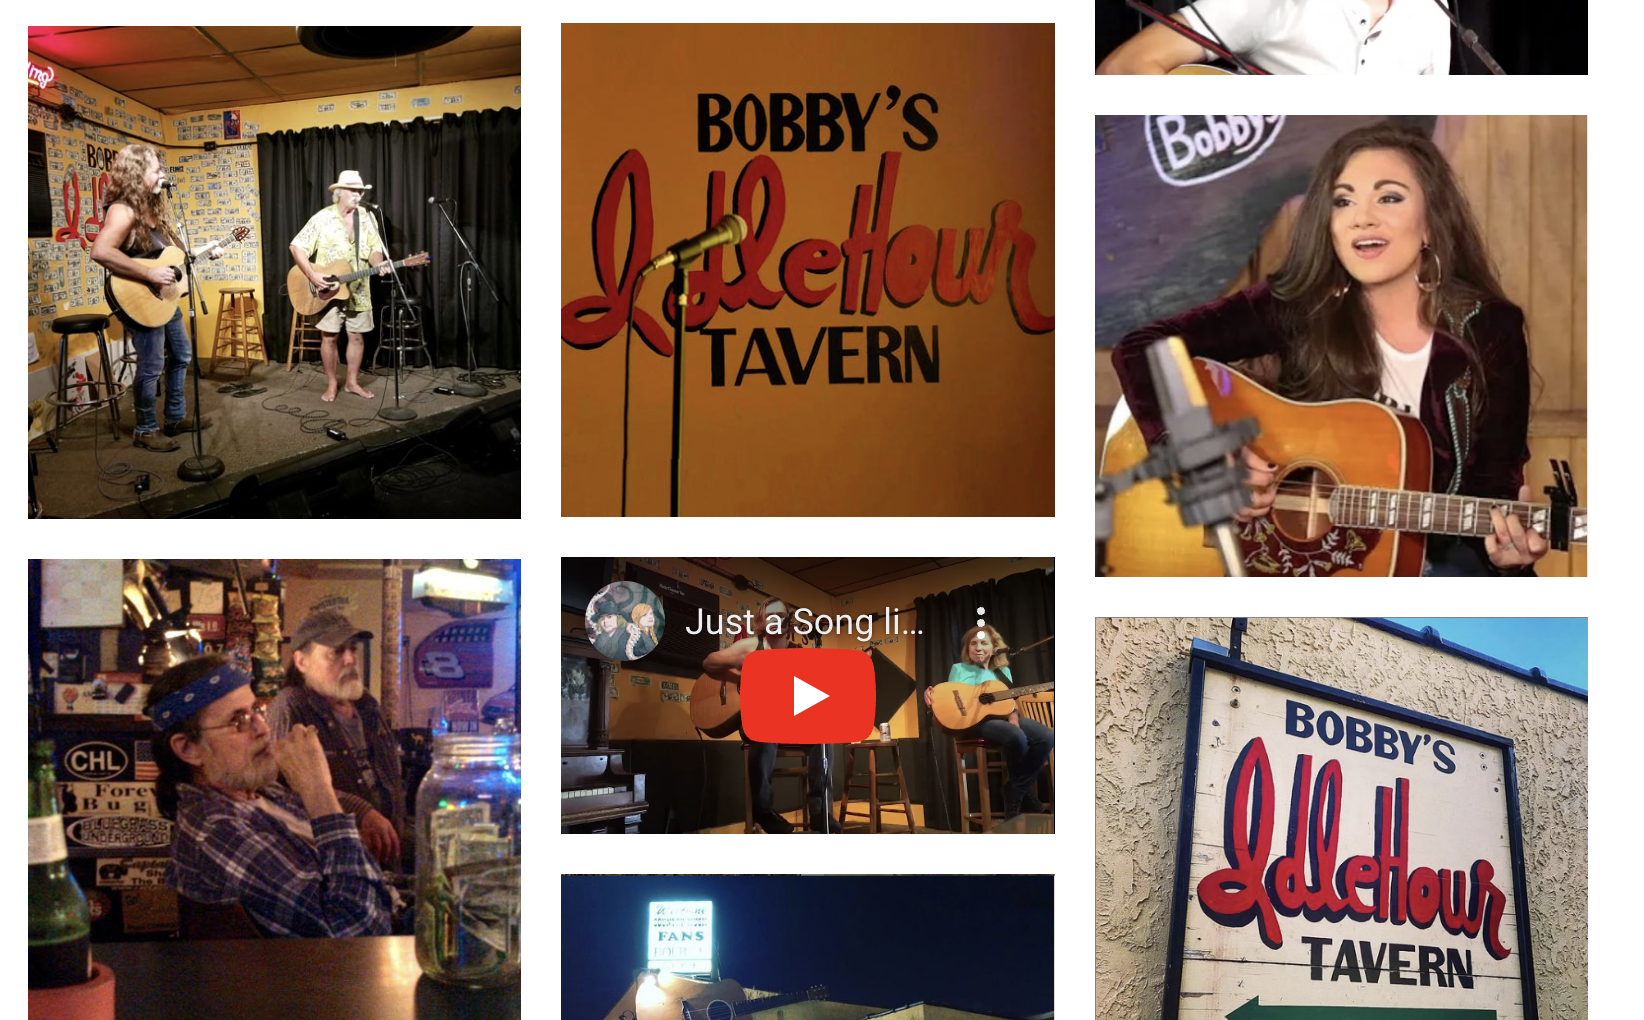 Bobby's Idol HOur tavern screenshots of singers and songwriters